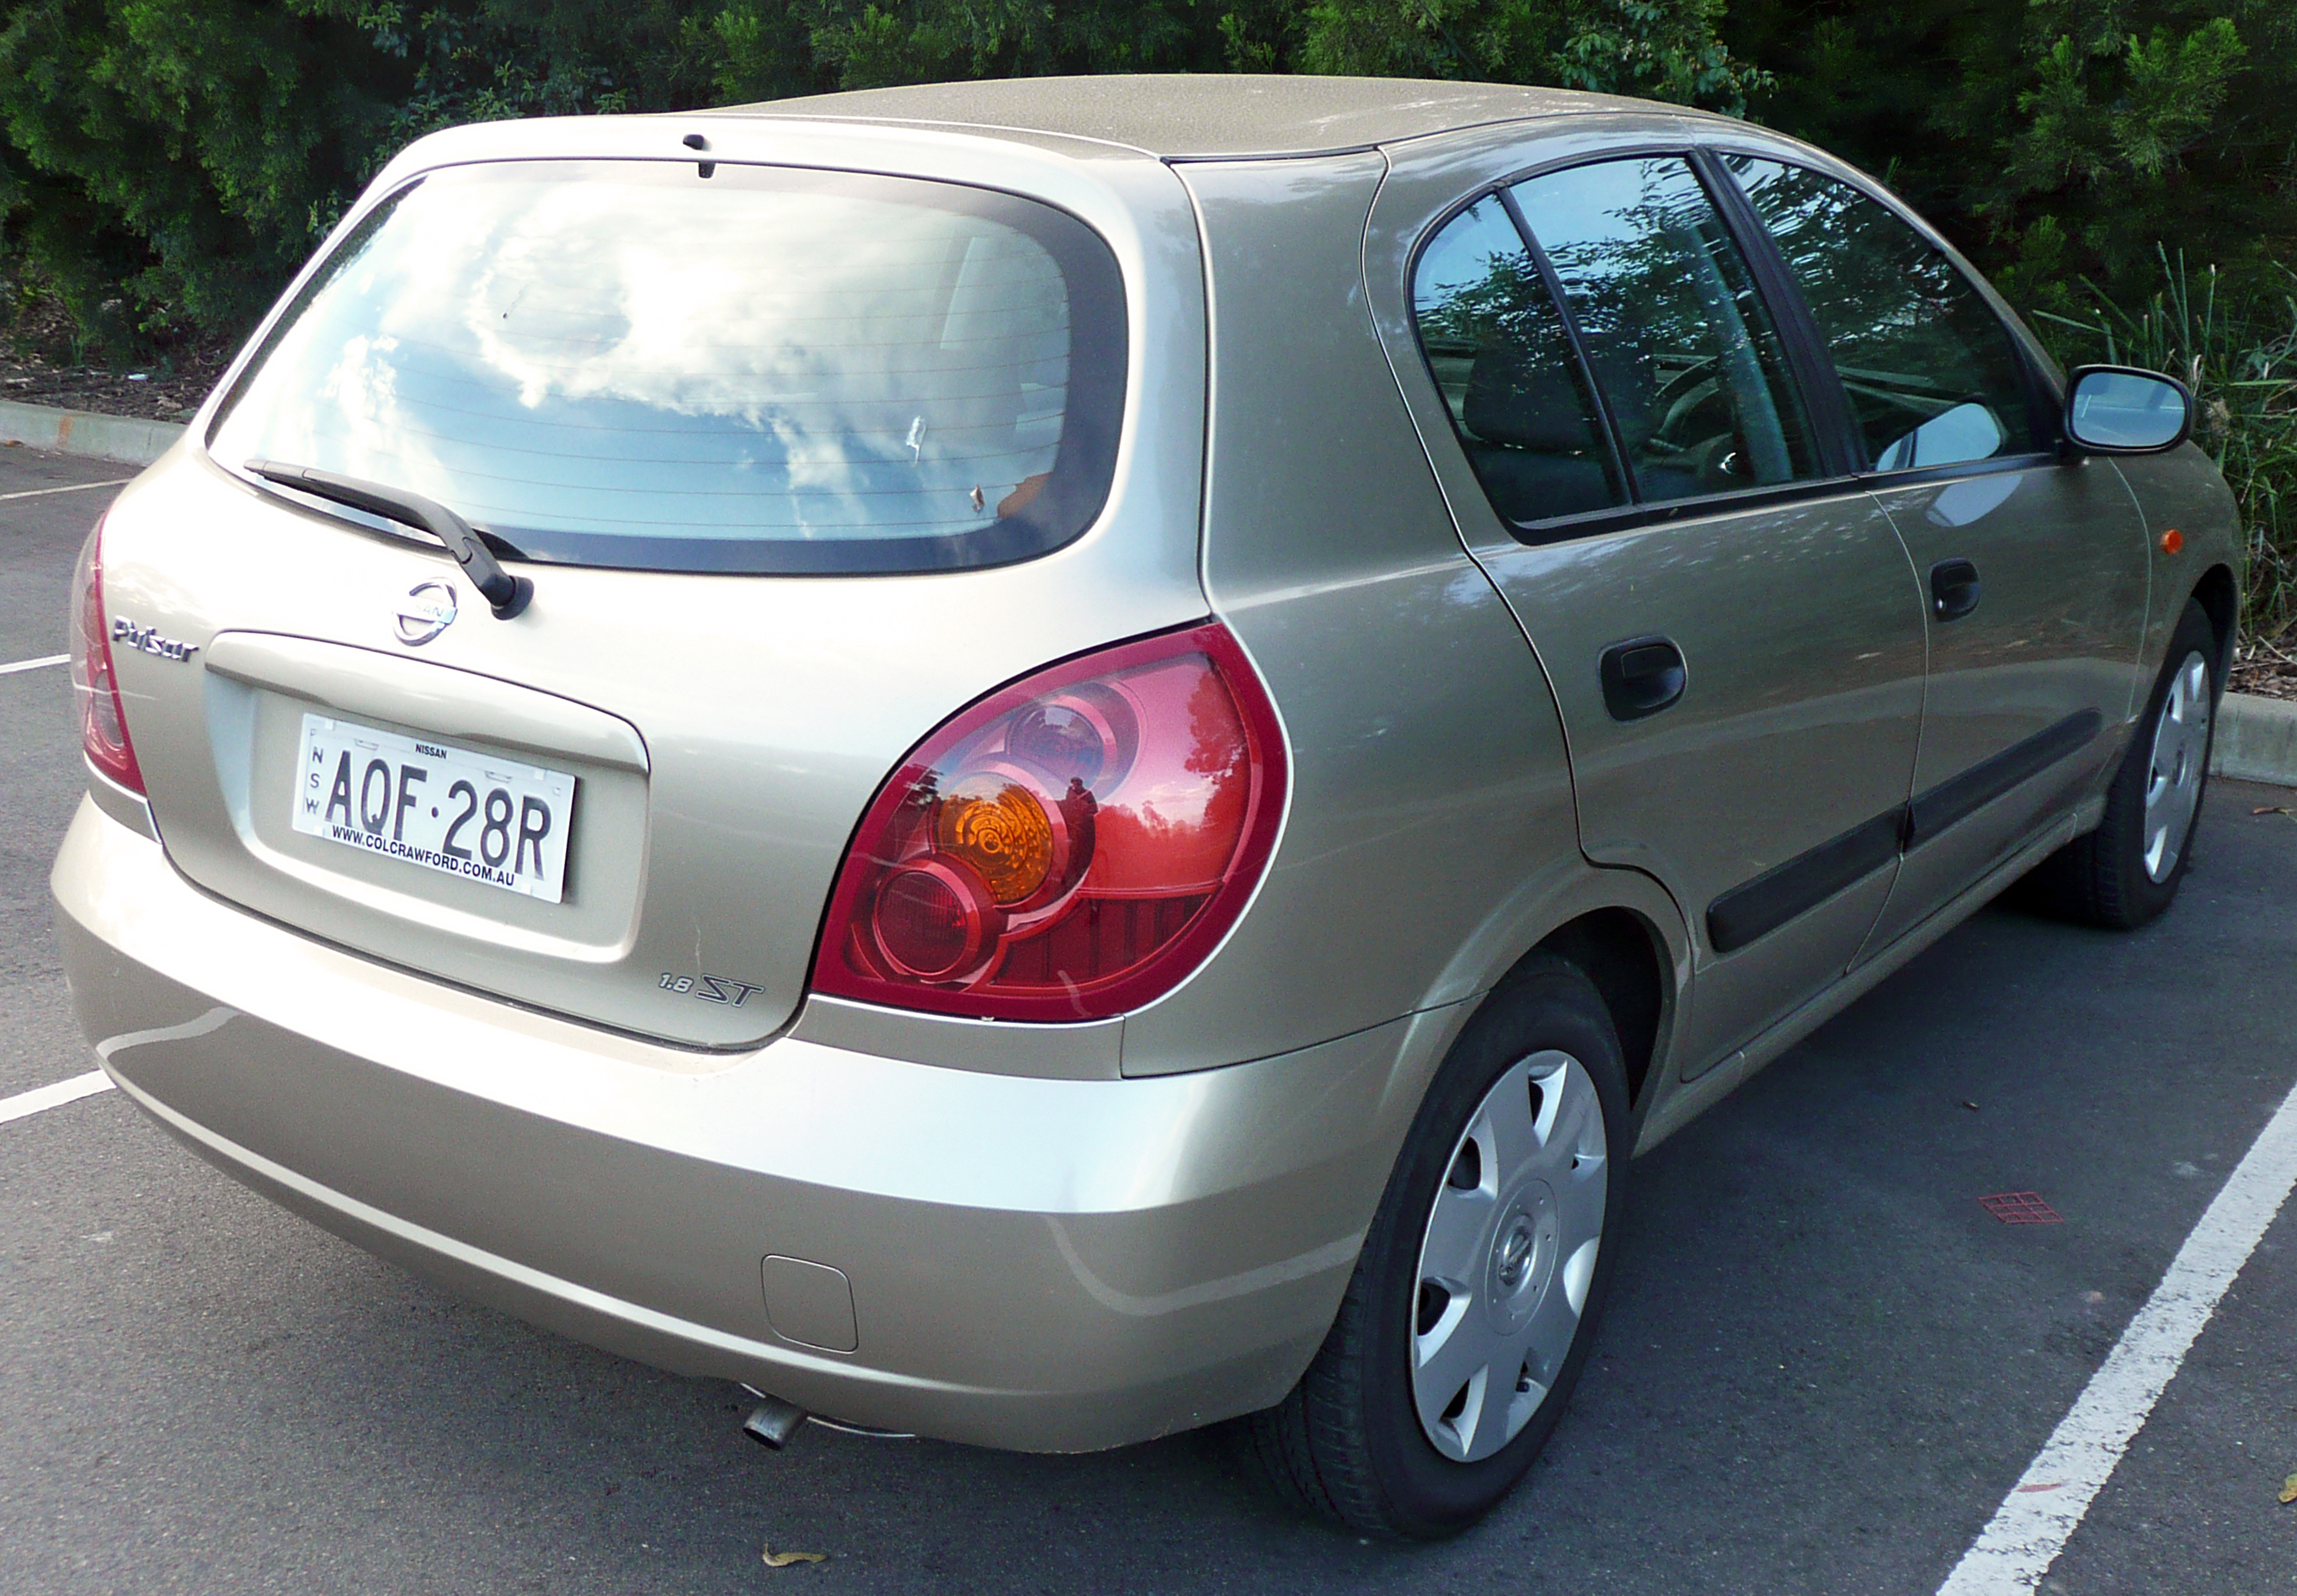 2005 Nissan pulsar st review #6